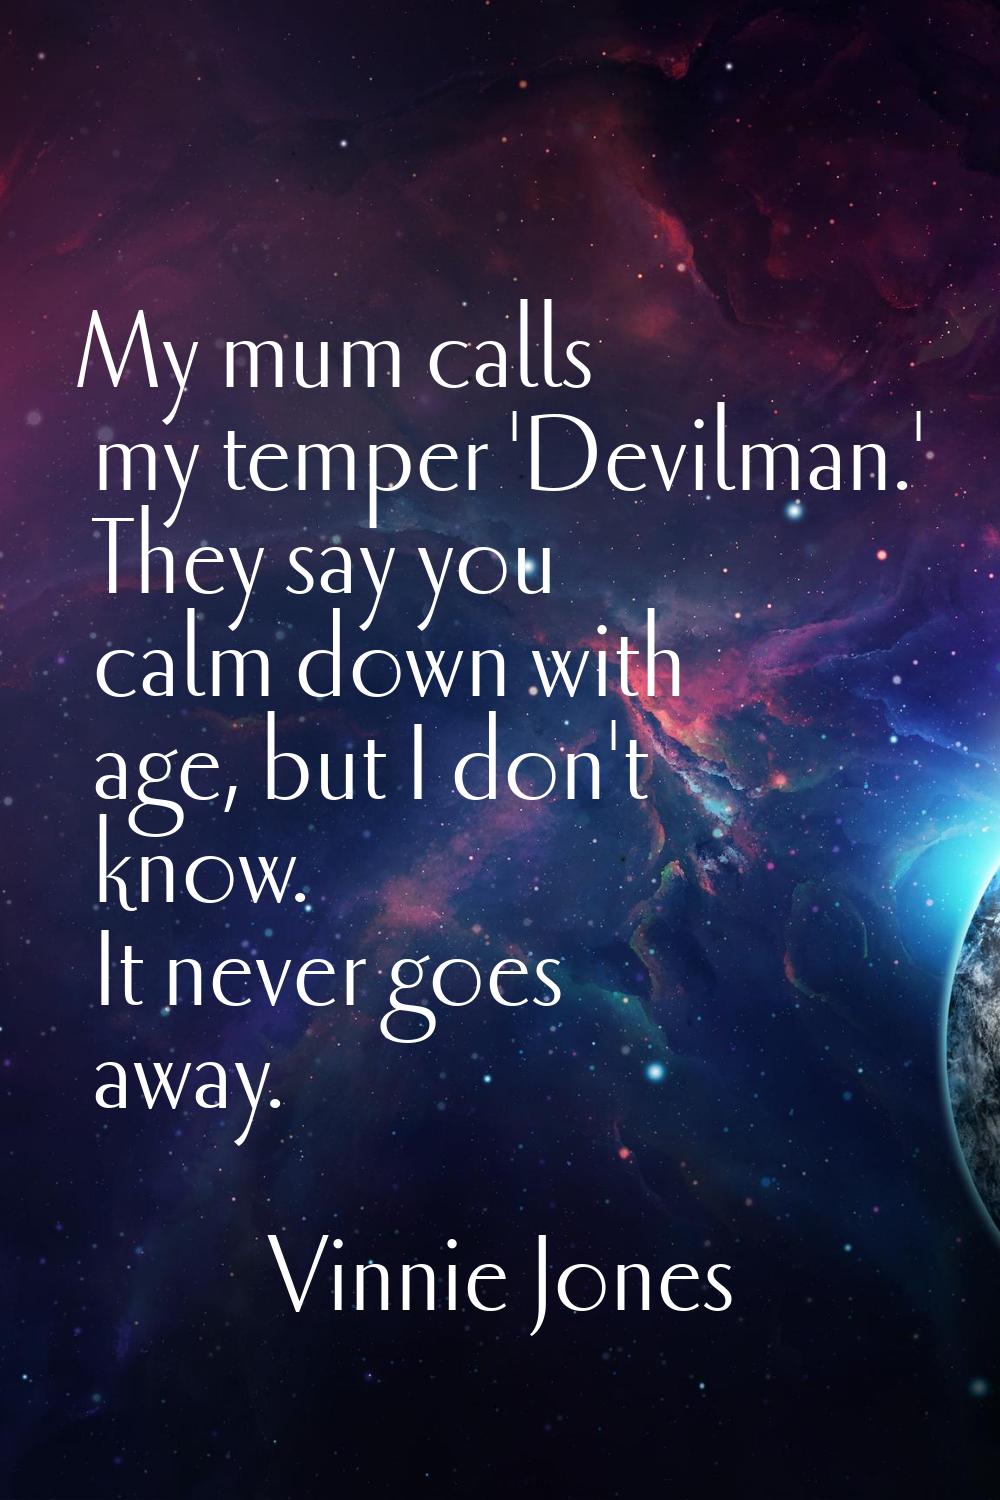 My mum calls my temper 'Devilman.' They say you calm down with age, but I don't know. It never goes